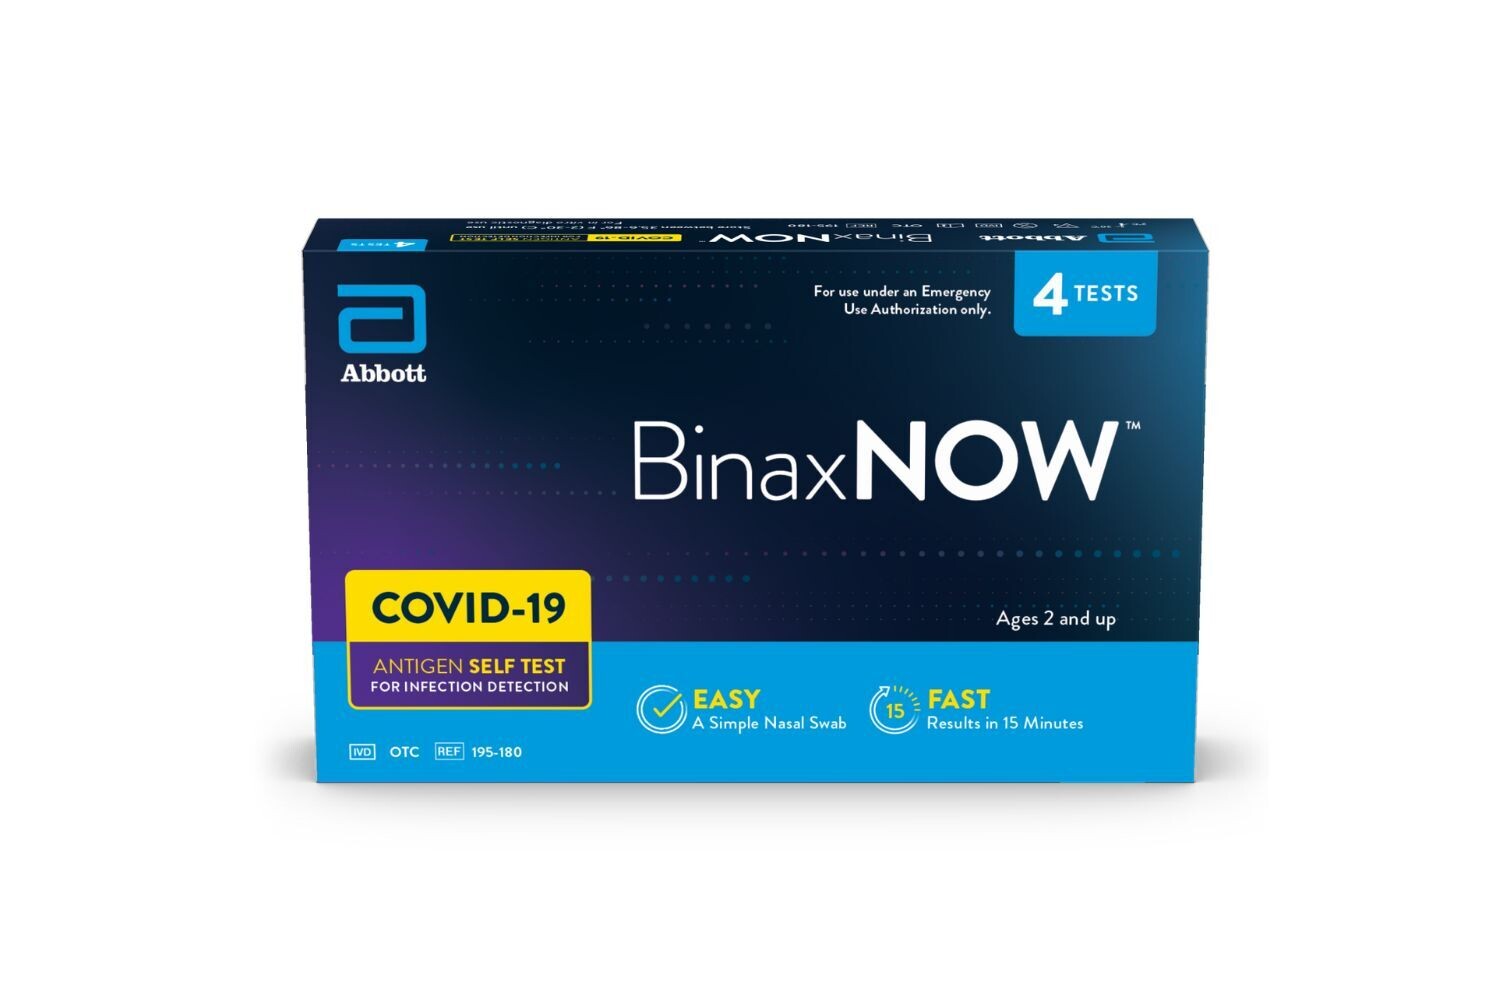 BinaxNow 4-Pack Covid19 Antigen Self-Test, Package Size: 1 Kit - 4 Tests